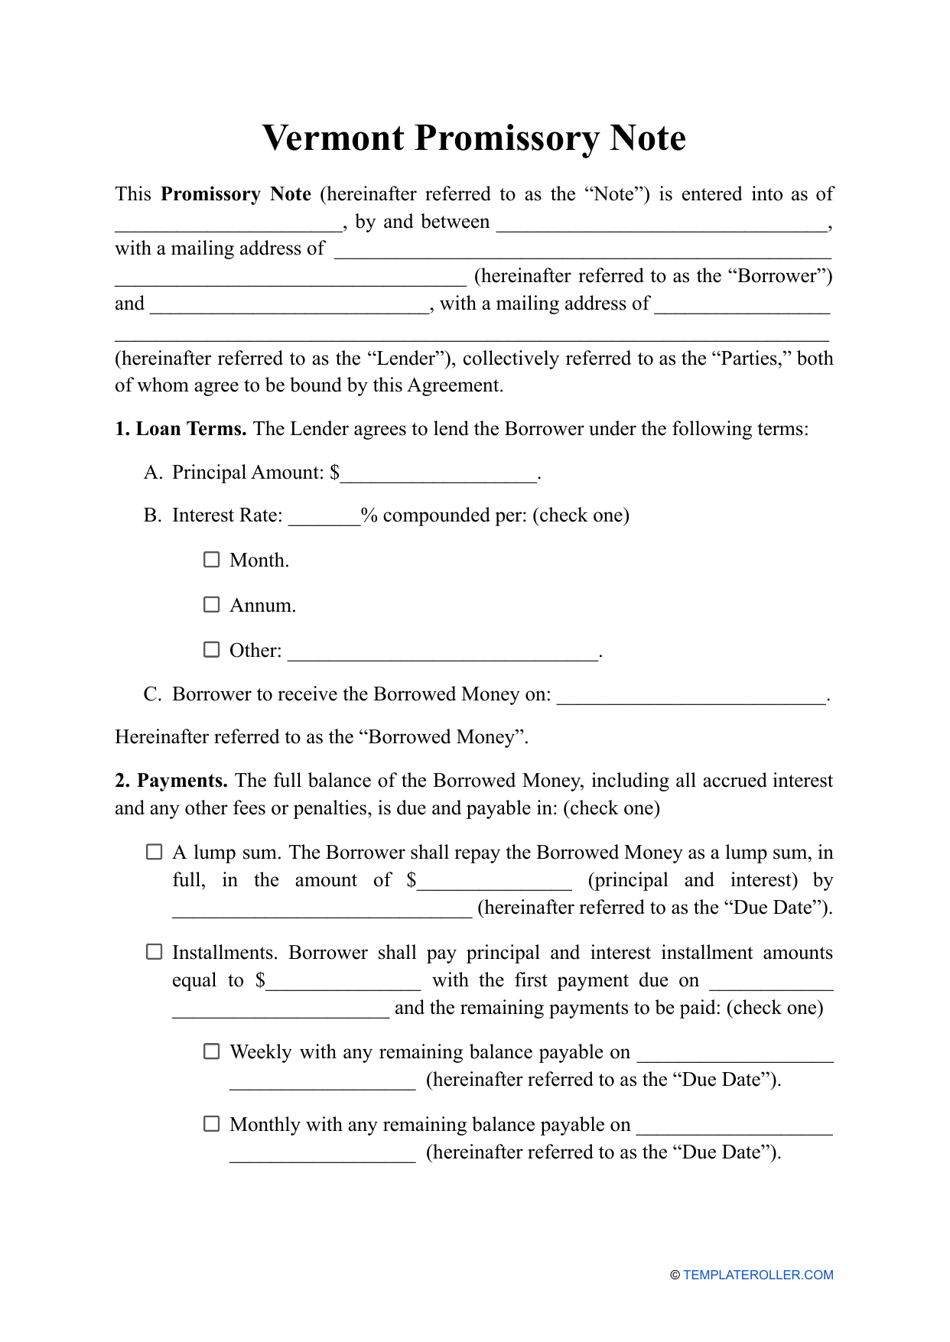 Promissory Note Template Vermont